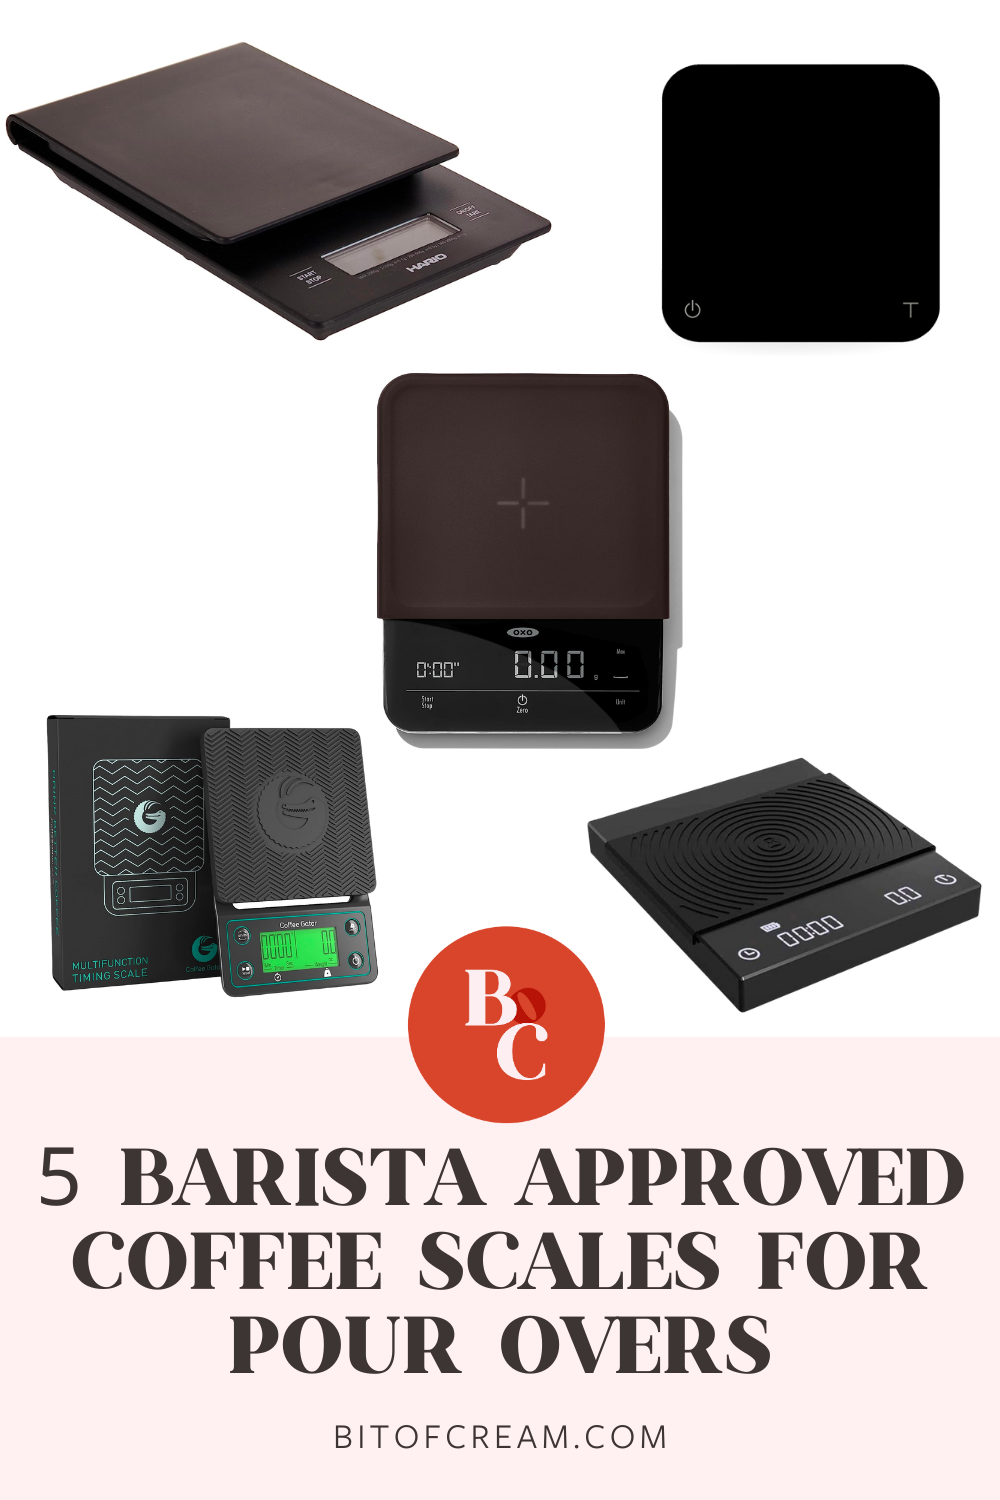 5 Barista Approved Coffee Scales For Pour Overs